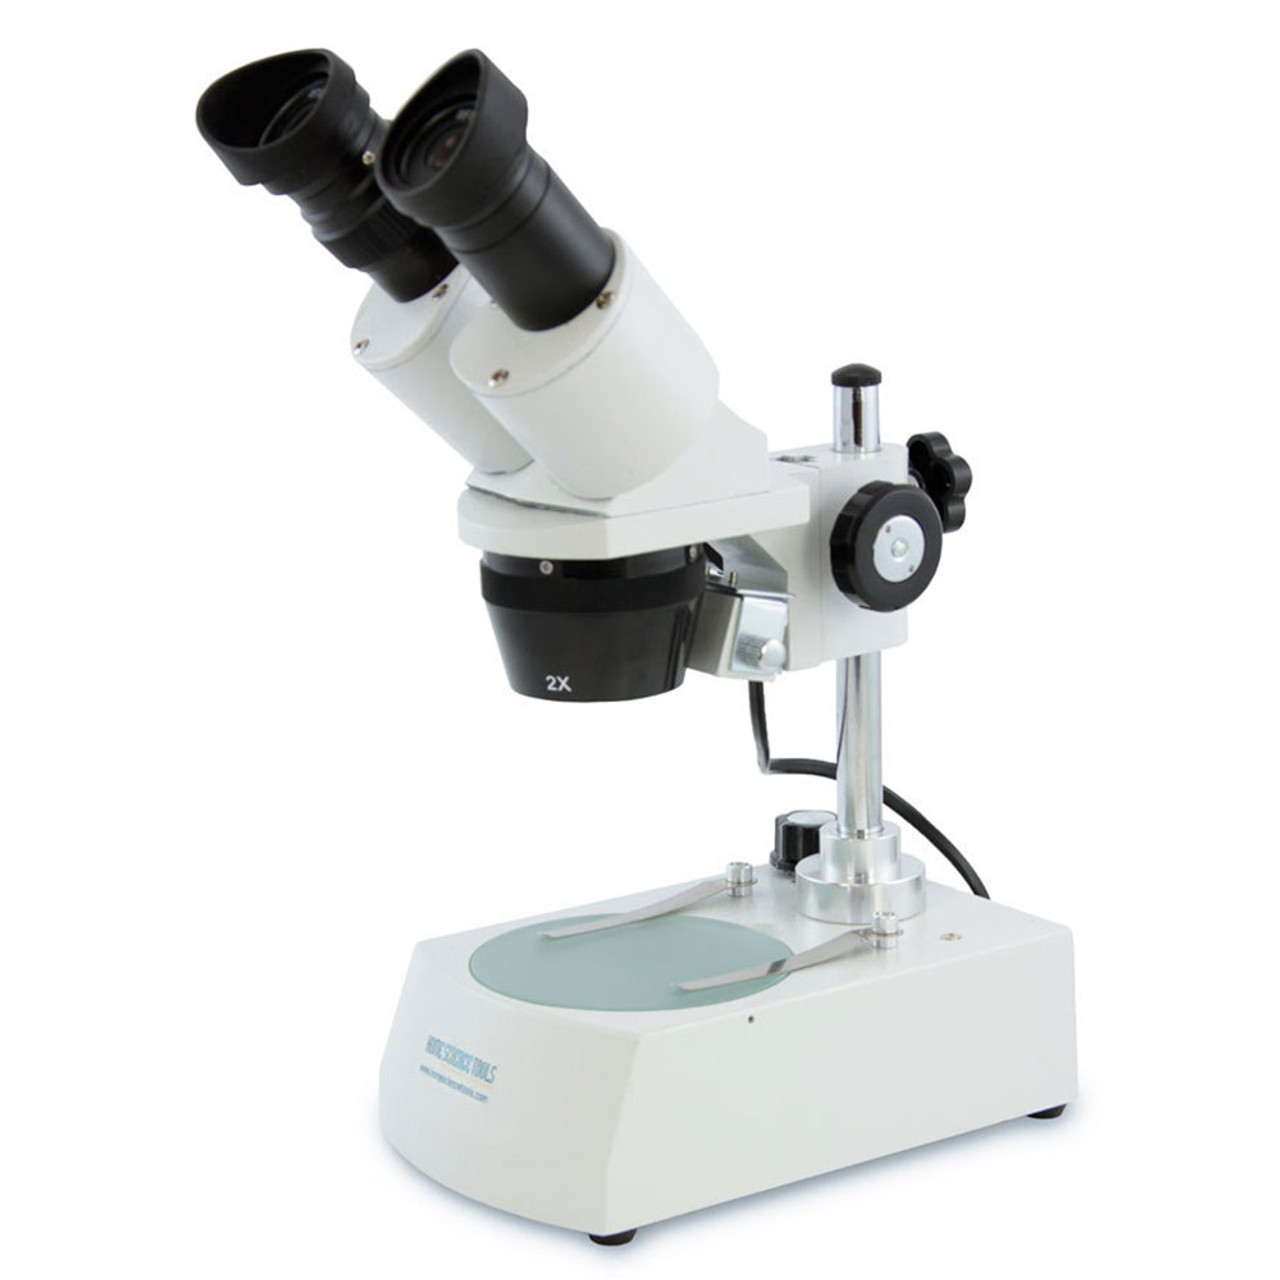 Stereo Microscope 20X to 40X Stereoscopic Binocular Microscope WF10X for Industrial Inspection Biological Observation